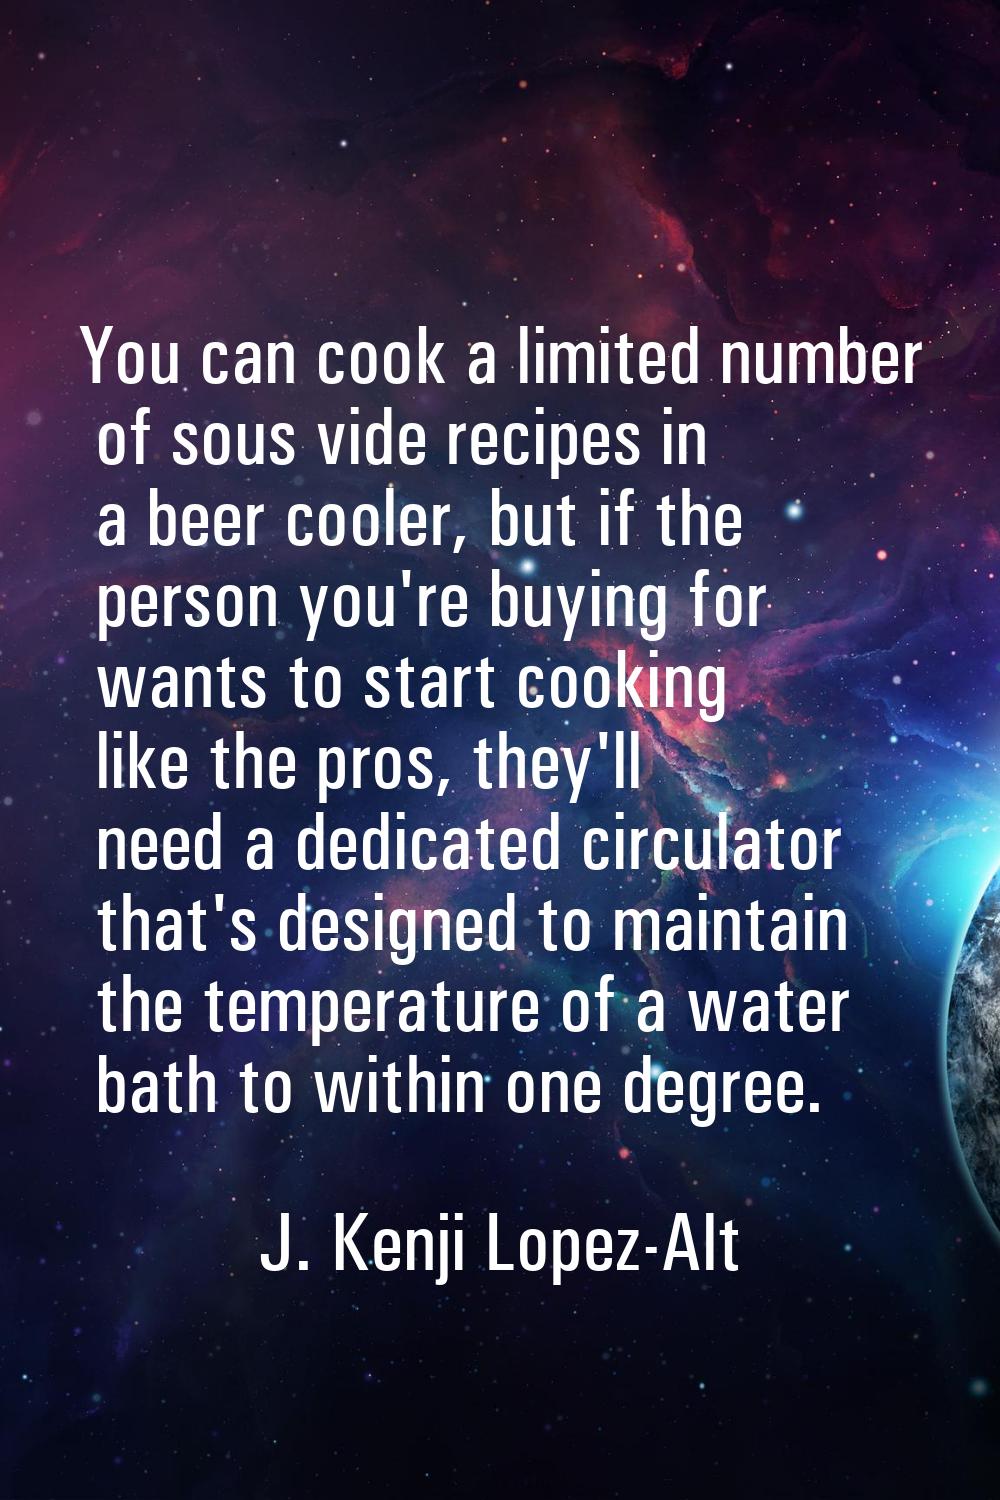 You can cook a limited number of sous vide recipes in a beer cooler, but if the person you're buyin